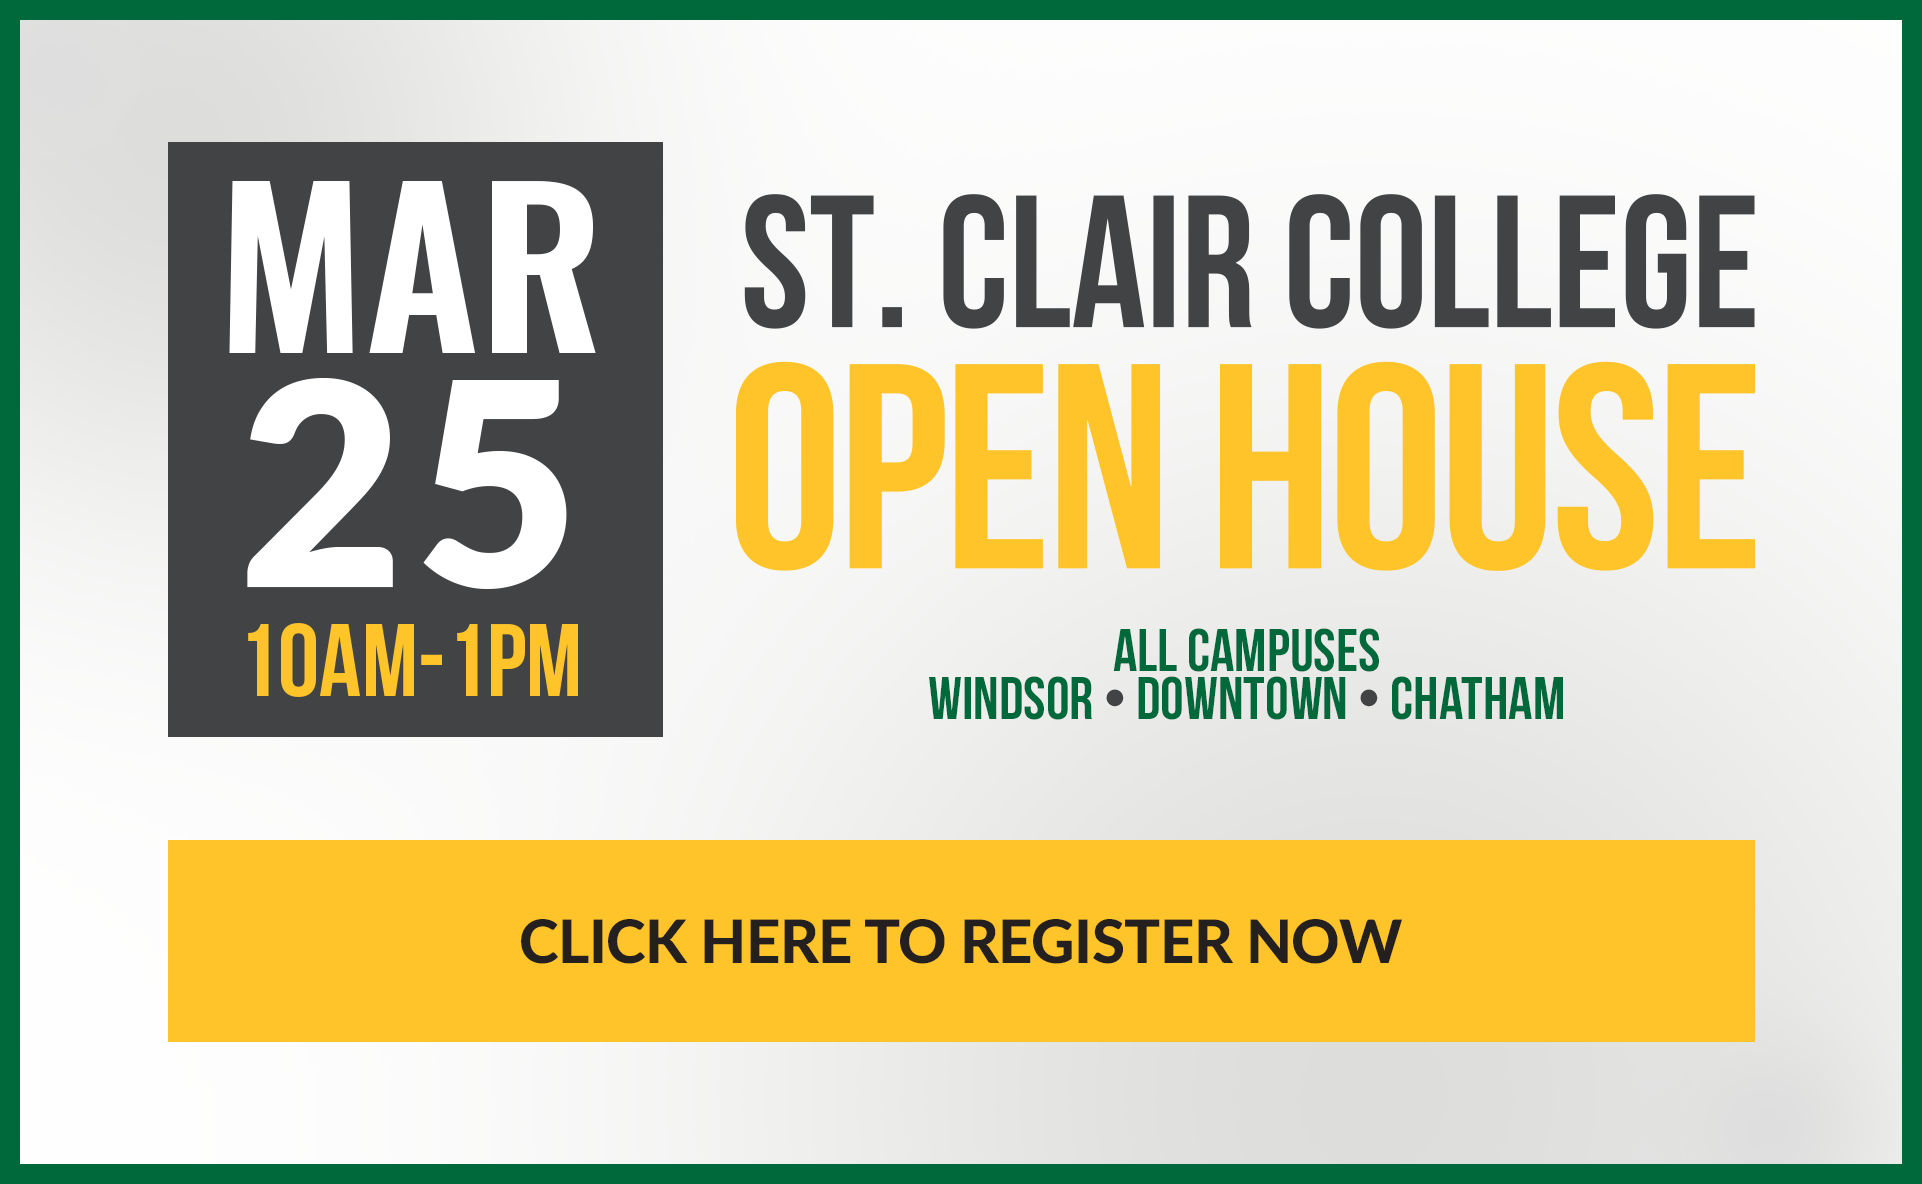 Register for our Open House on Mar. 25, 2023 from 10am to 1pm